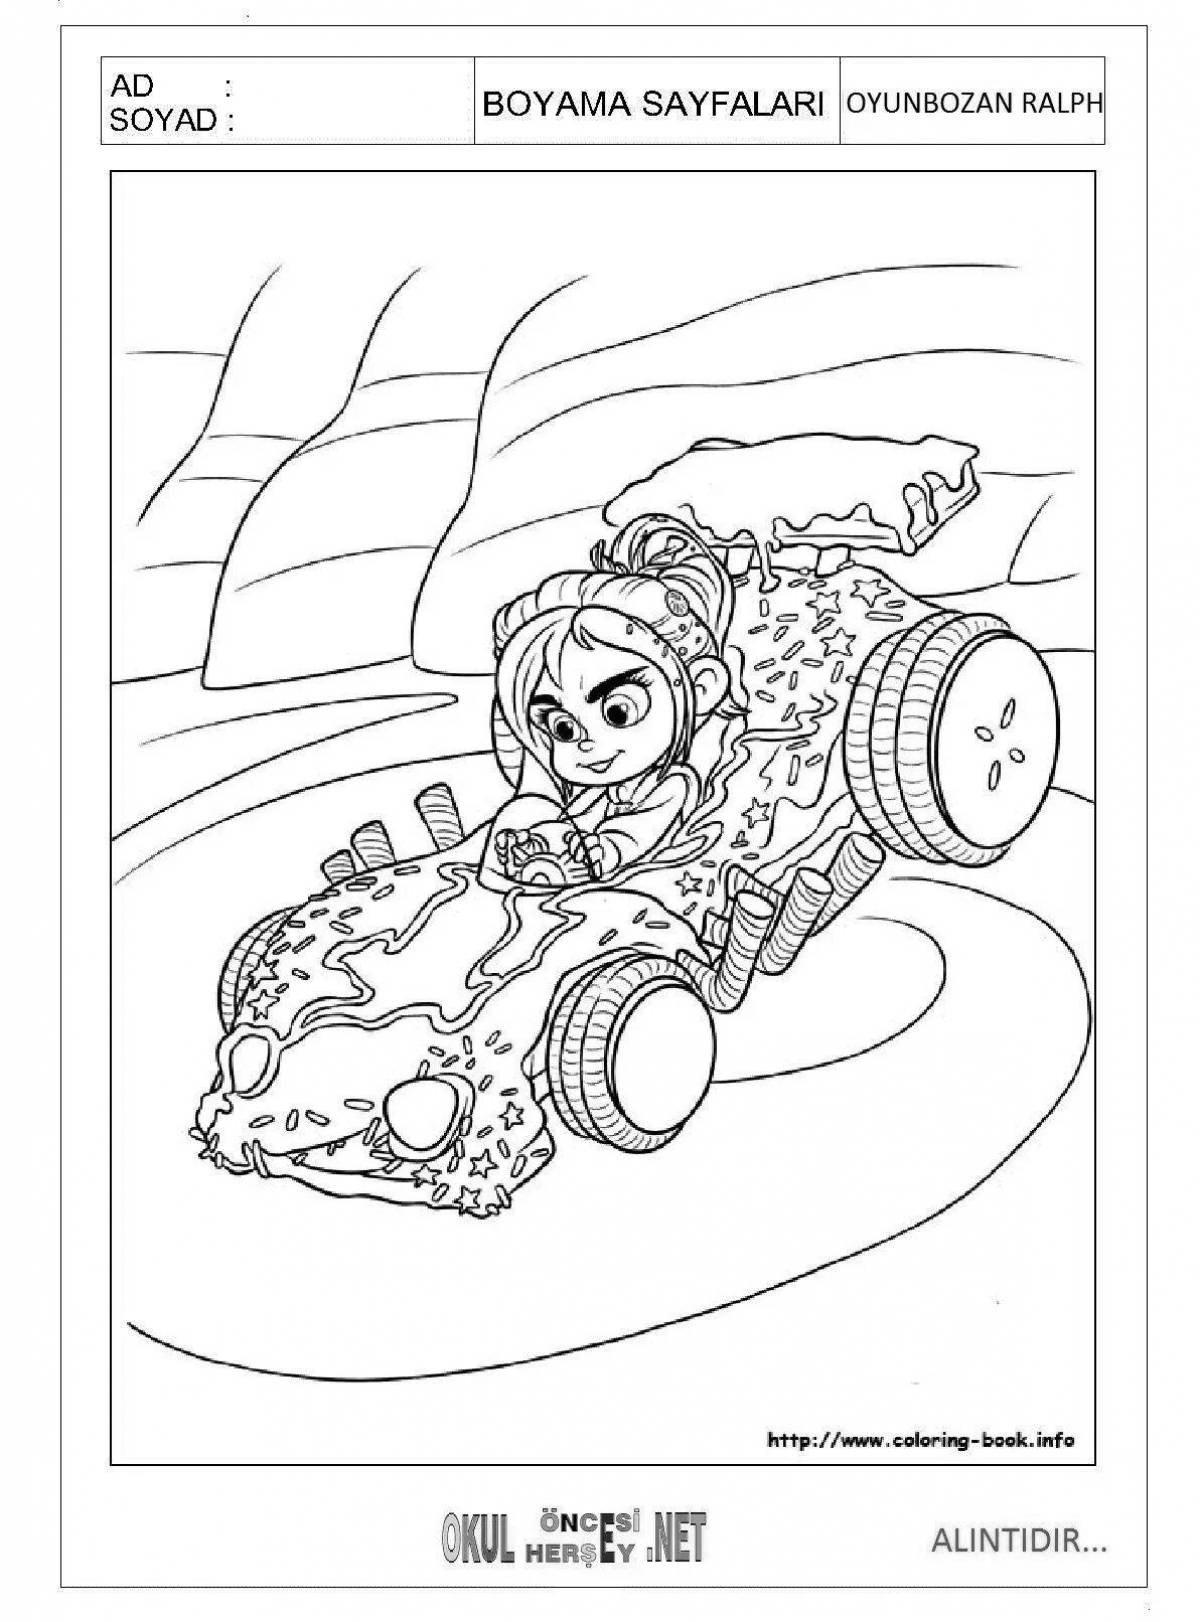 Penelope funny coloring book